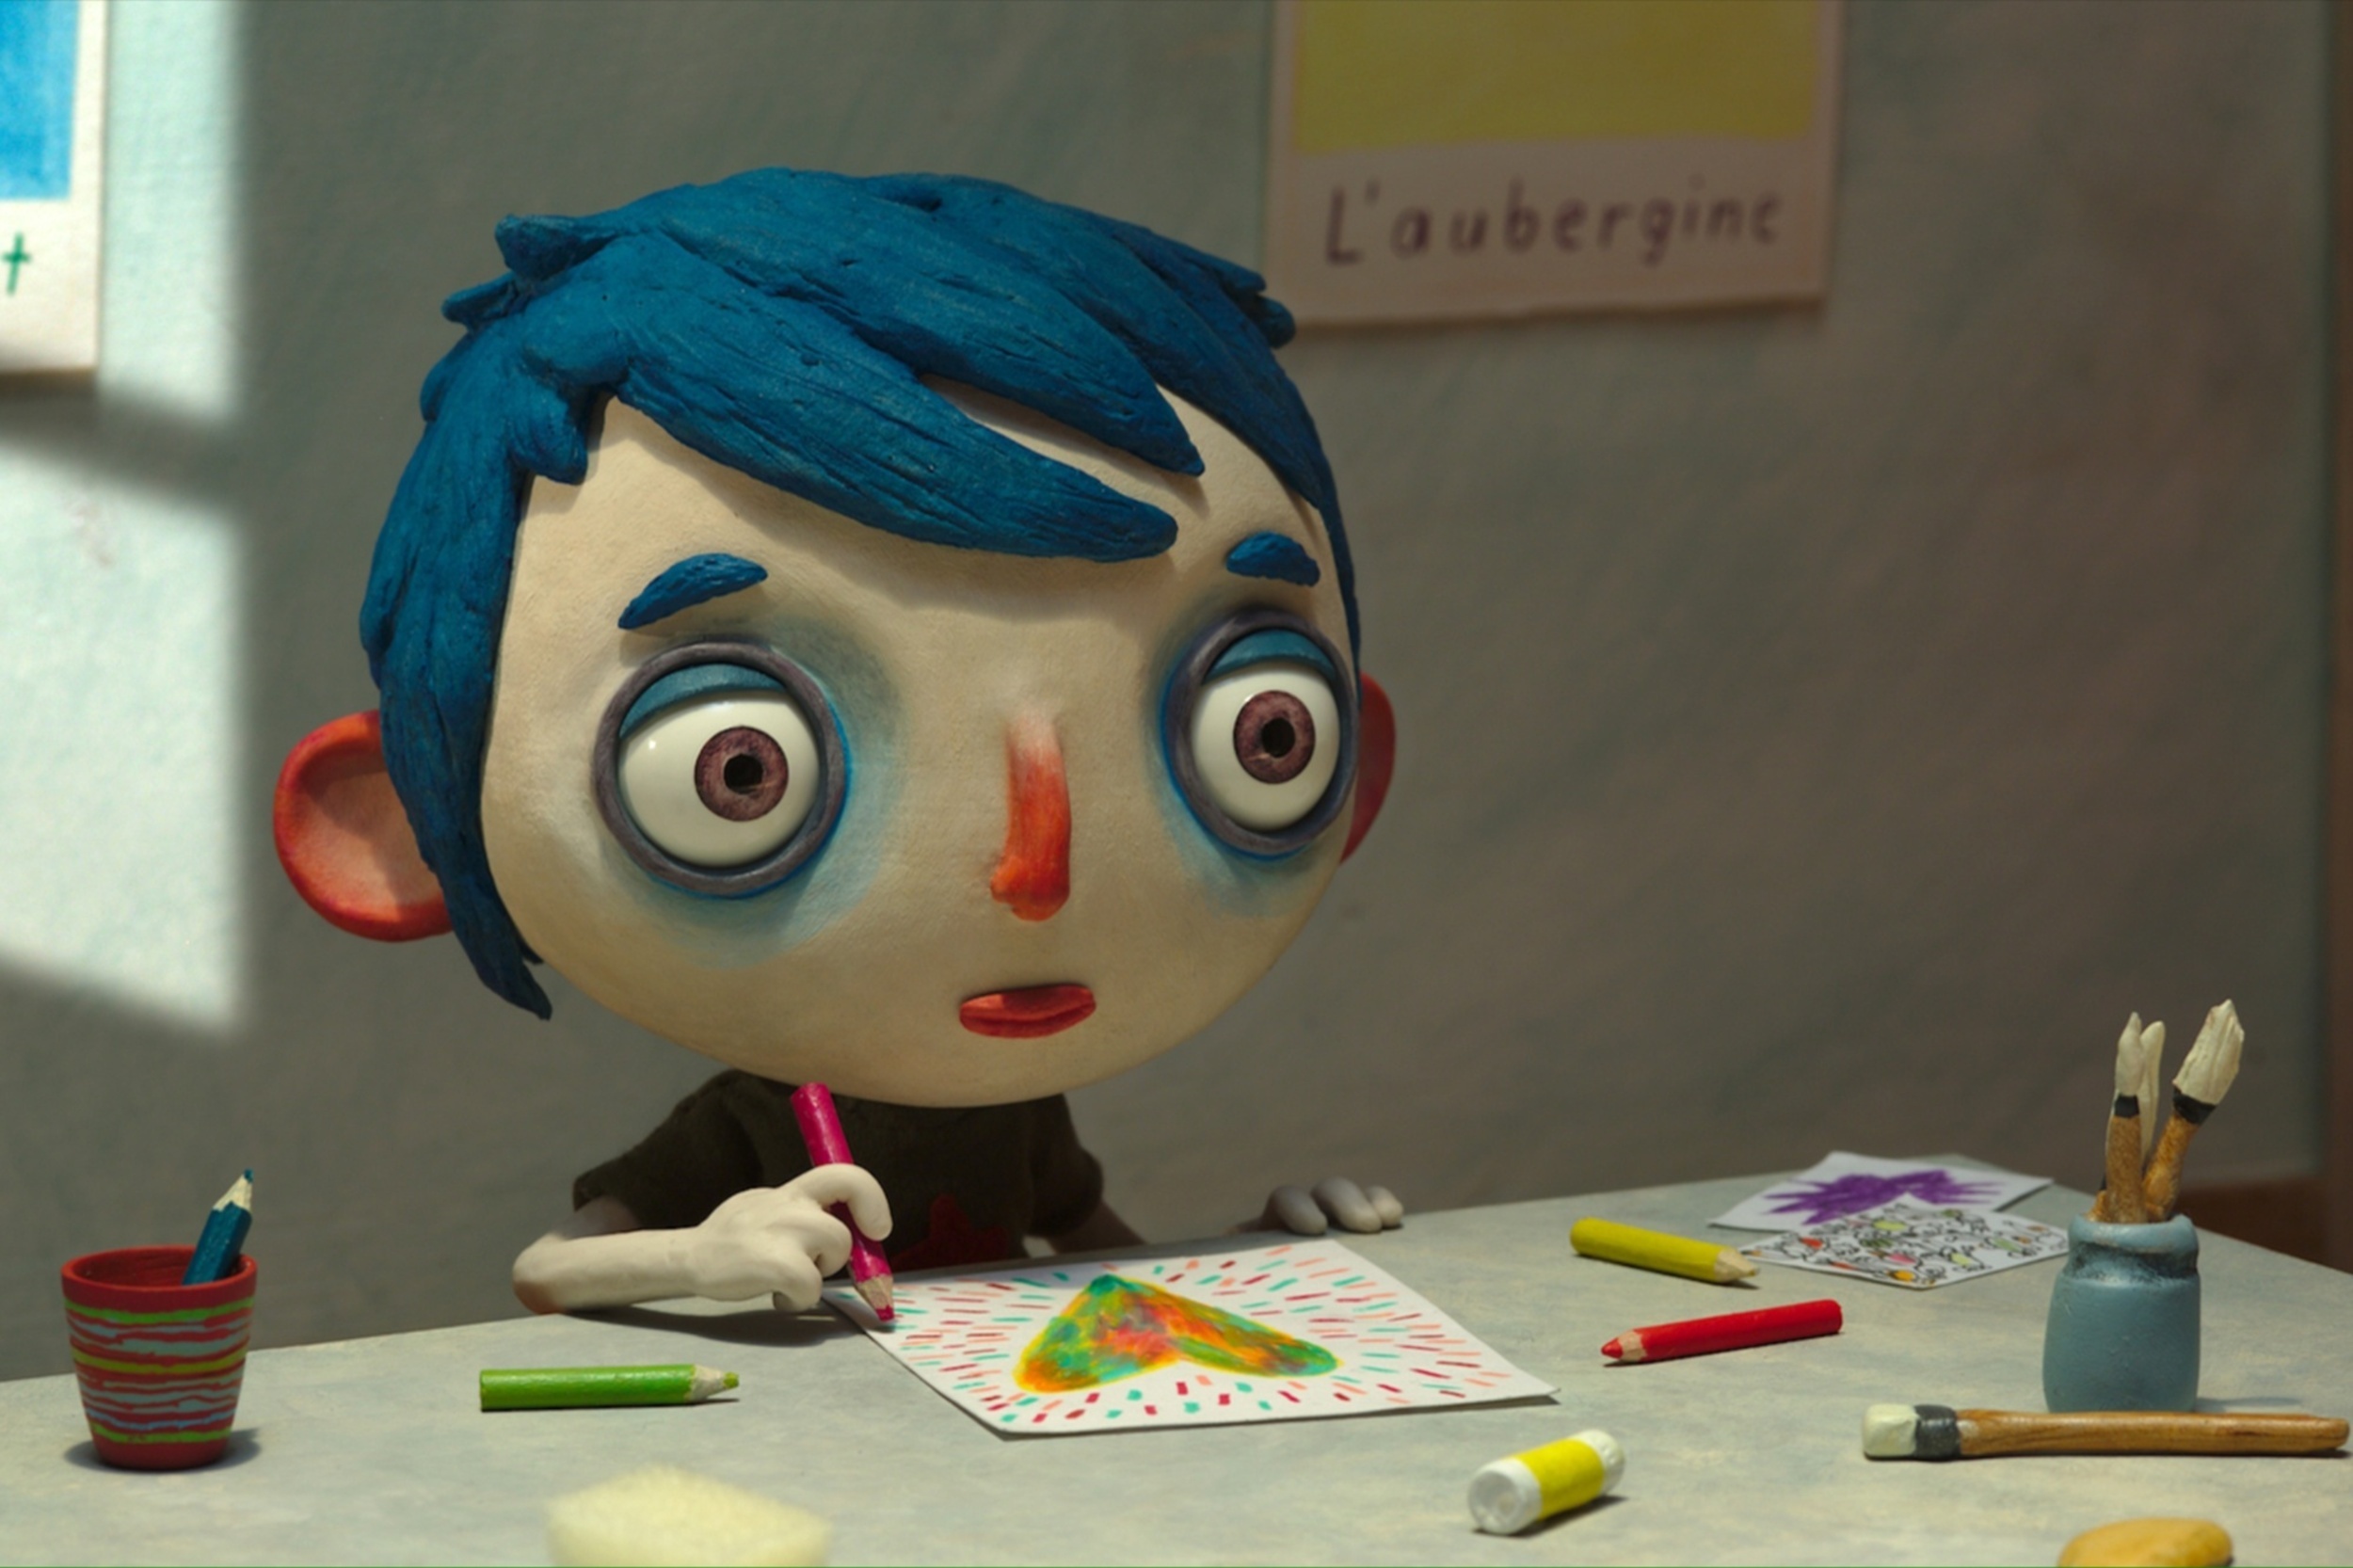 <p>Co-written by <em>Portrait of a Lady on Fire</em> director Céline Sciamma, <em>My Life as a Zucchini</em> is a French-Swiss film about finding hope after tragedy. The story follows a young boy sent to an orphanage after the death of his mother, where he forms friendships that help him love and trust again. At just a little over an hour in runtime, the film’s simplicity is its greatest strength, telling a familiar story with originality and empathy. It is bittersweet and incredibly moving. </p><p><a href='https://www.msn.com/en-us/community/channel/vid-cj9pqbr0vn9in2b6ddcd8sfgpfq6x6utp44fssrv6mc2gtybw0us'>Did you enjoy this slideshow? Follow us on MSN to see more of our exclusive entertainment content.</a></p>